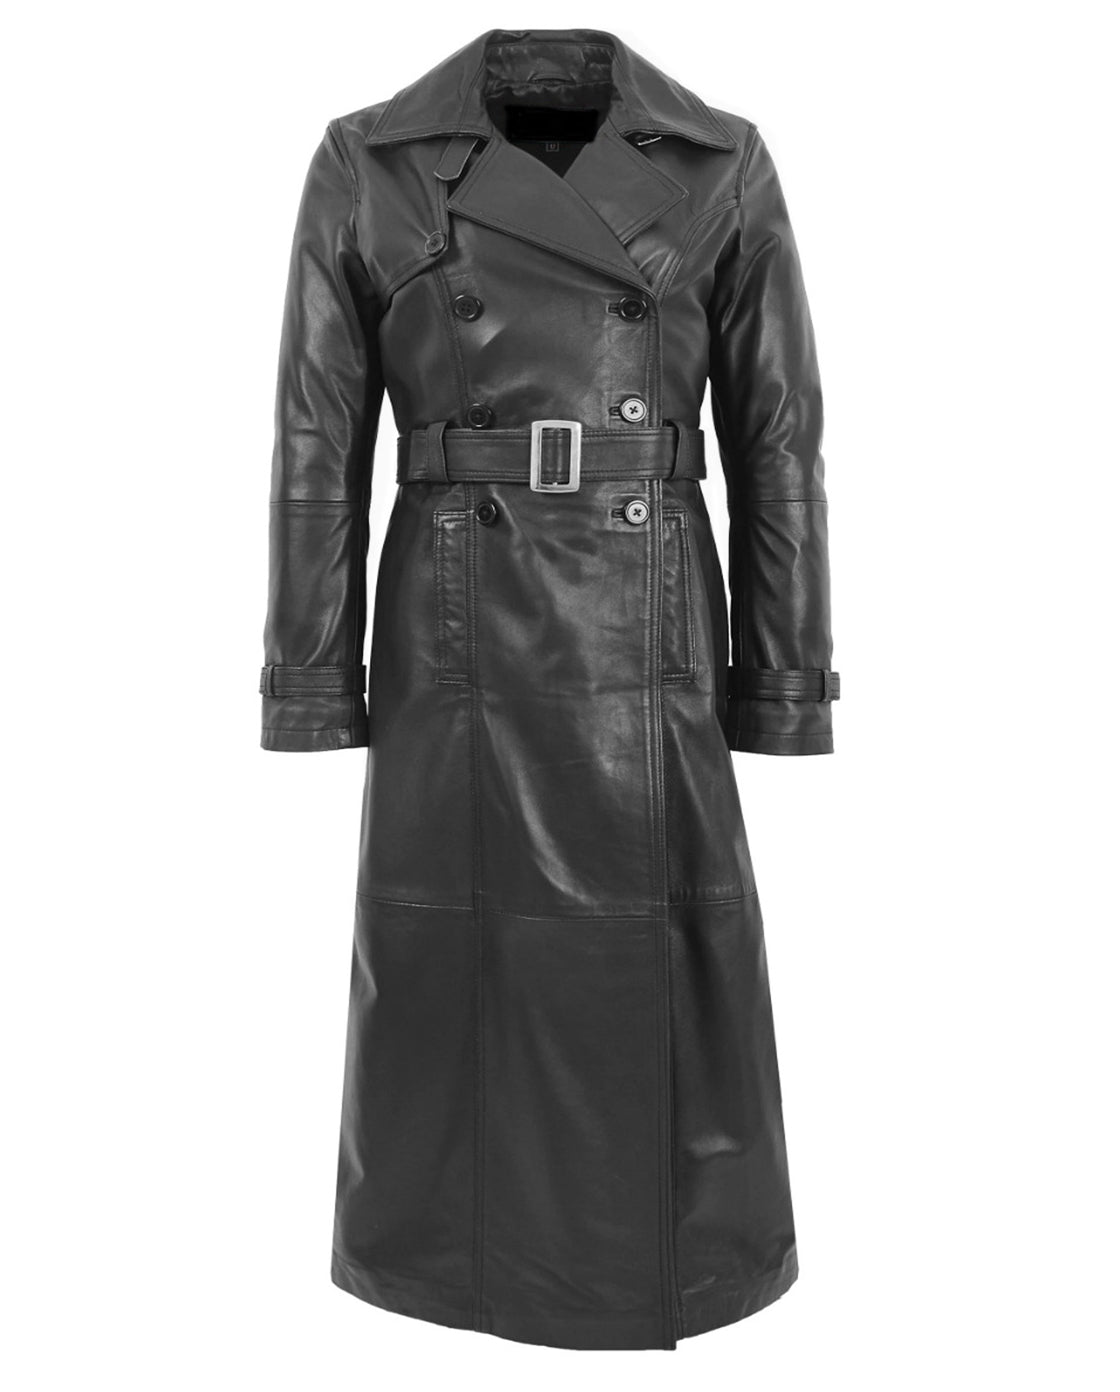 Women's Coats & Jackets, Leather Trench & Winter